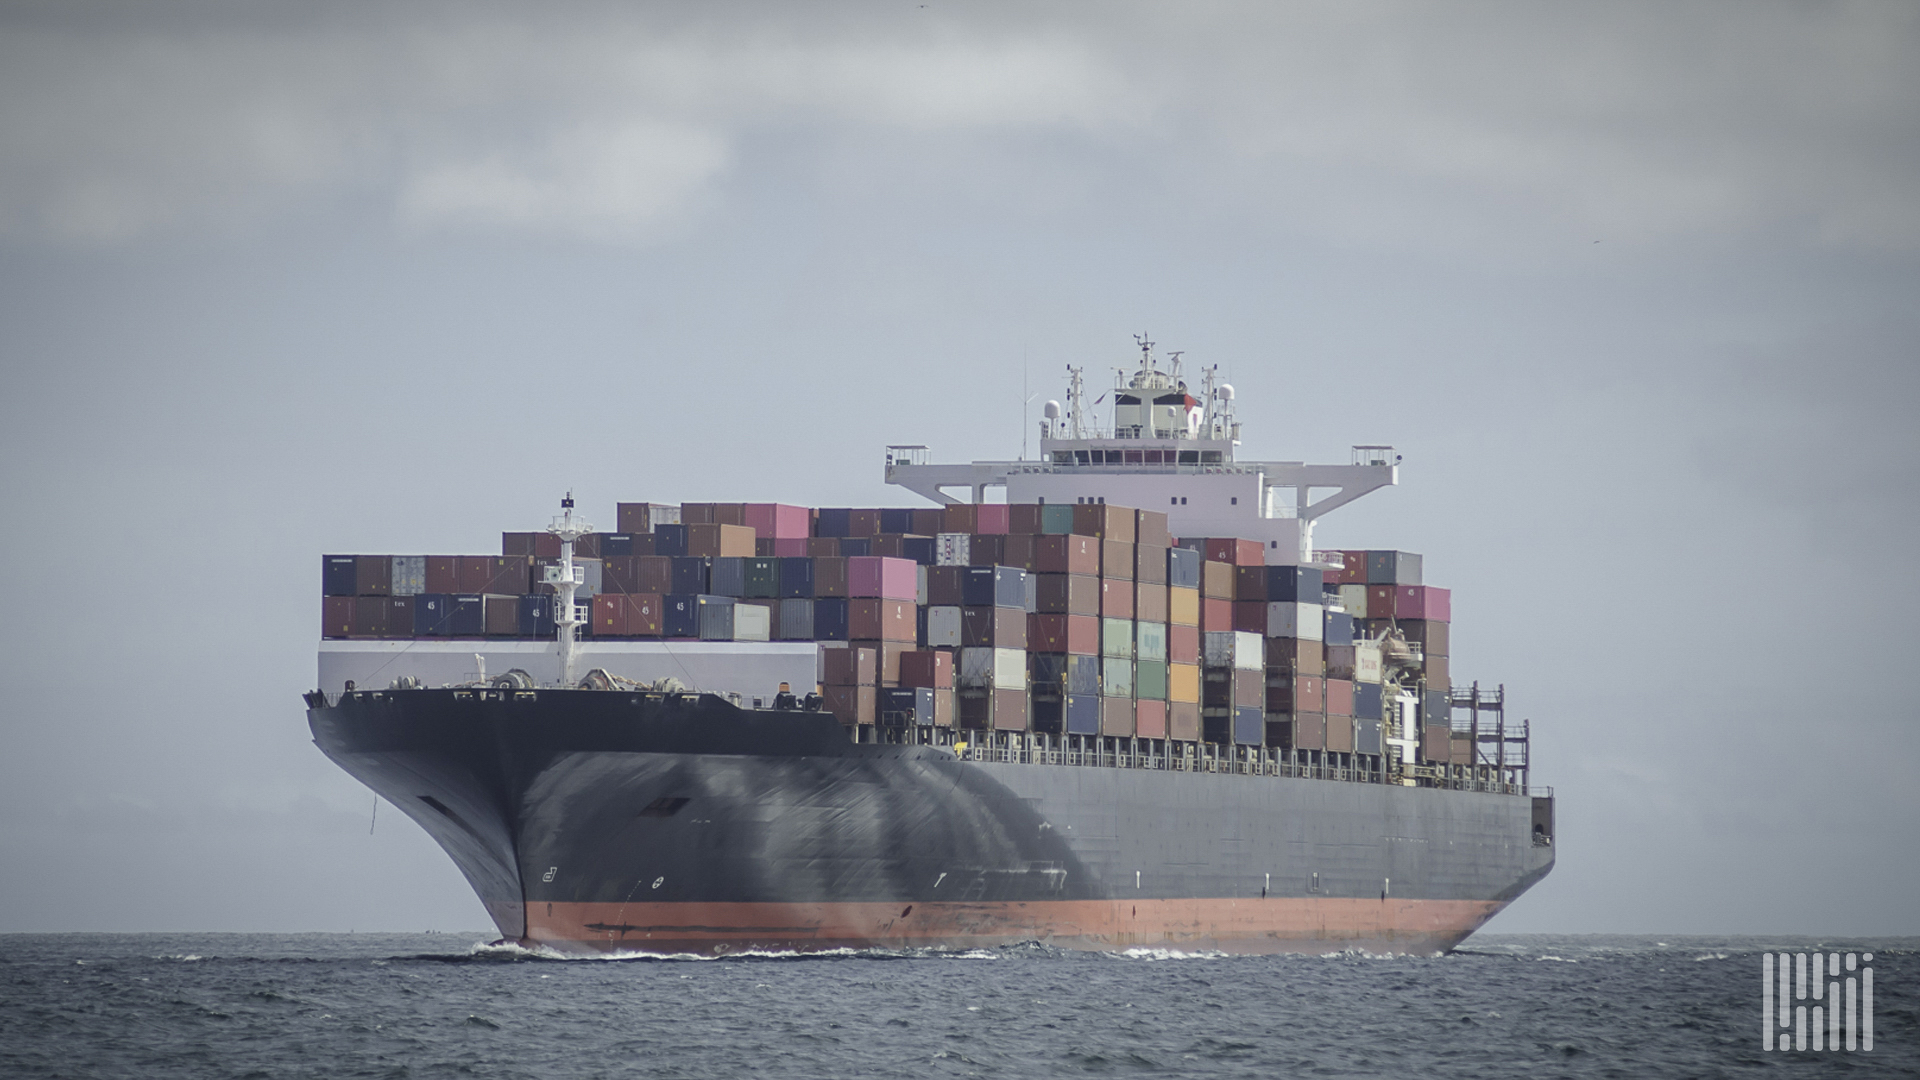 A container ship travels on the water to illustrate an article about cybercriminals selling access to shipping firms